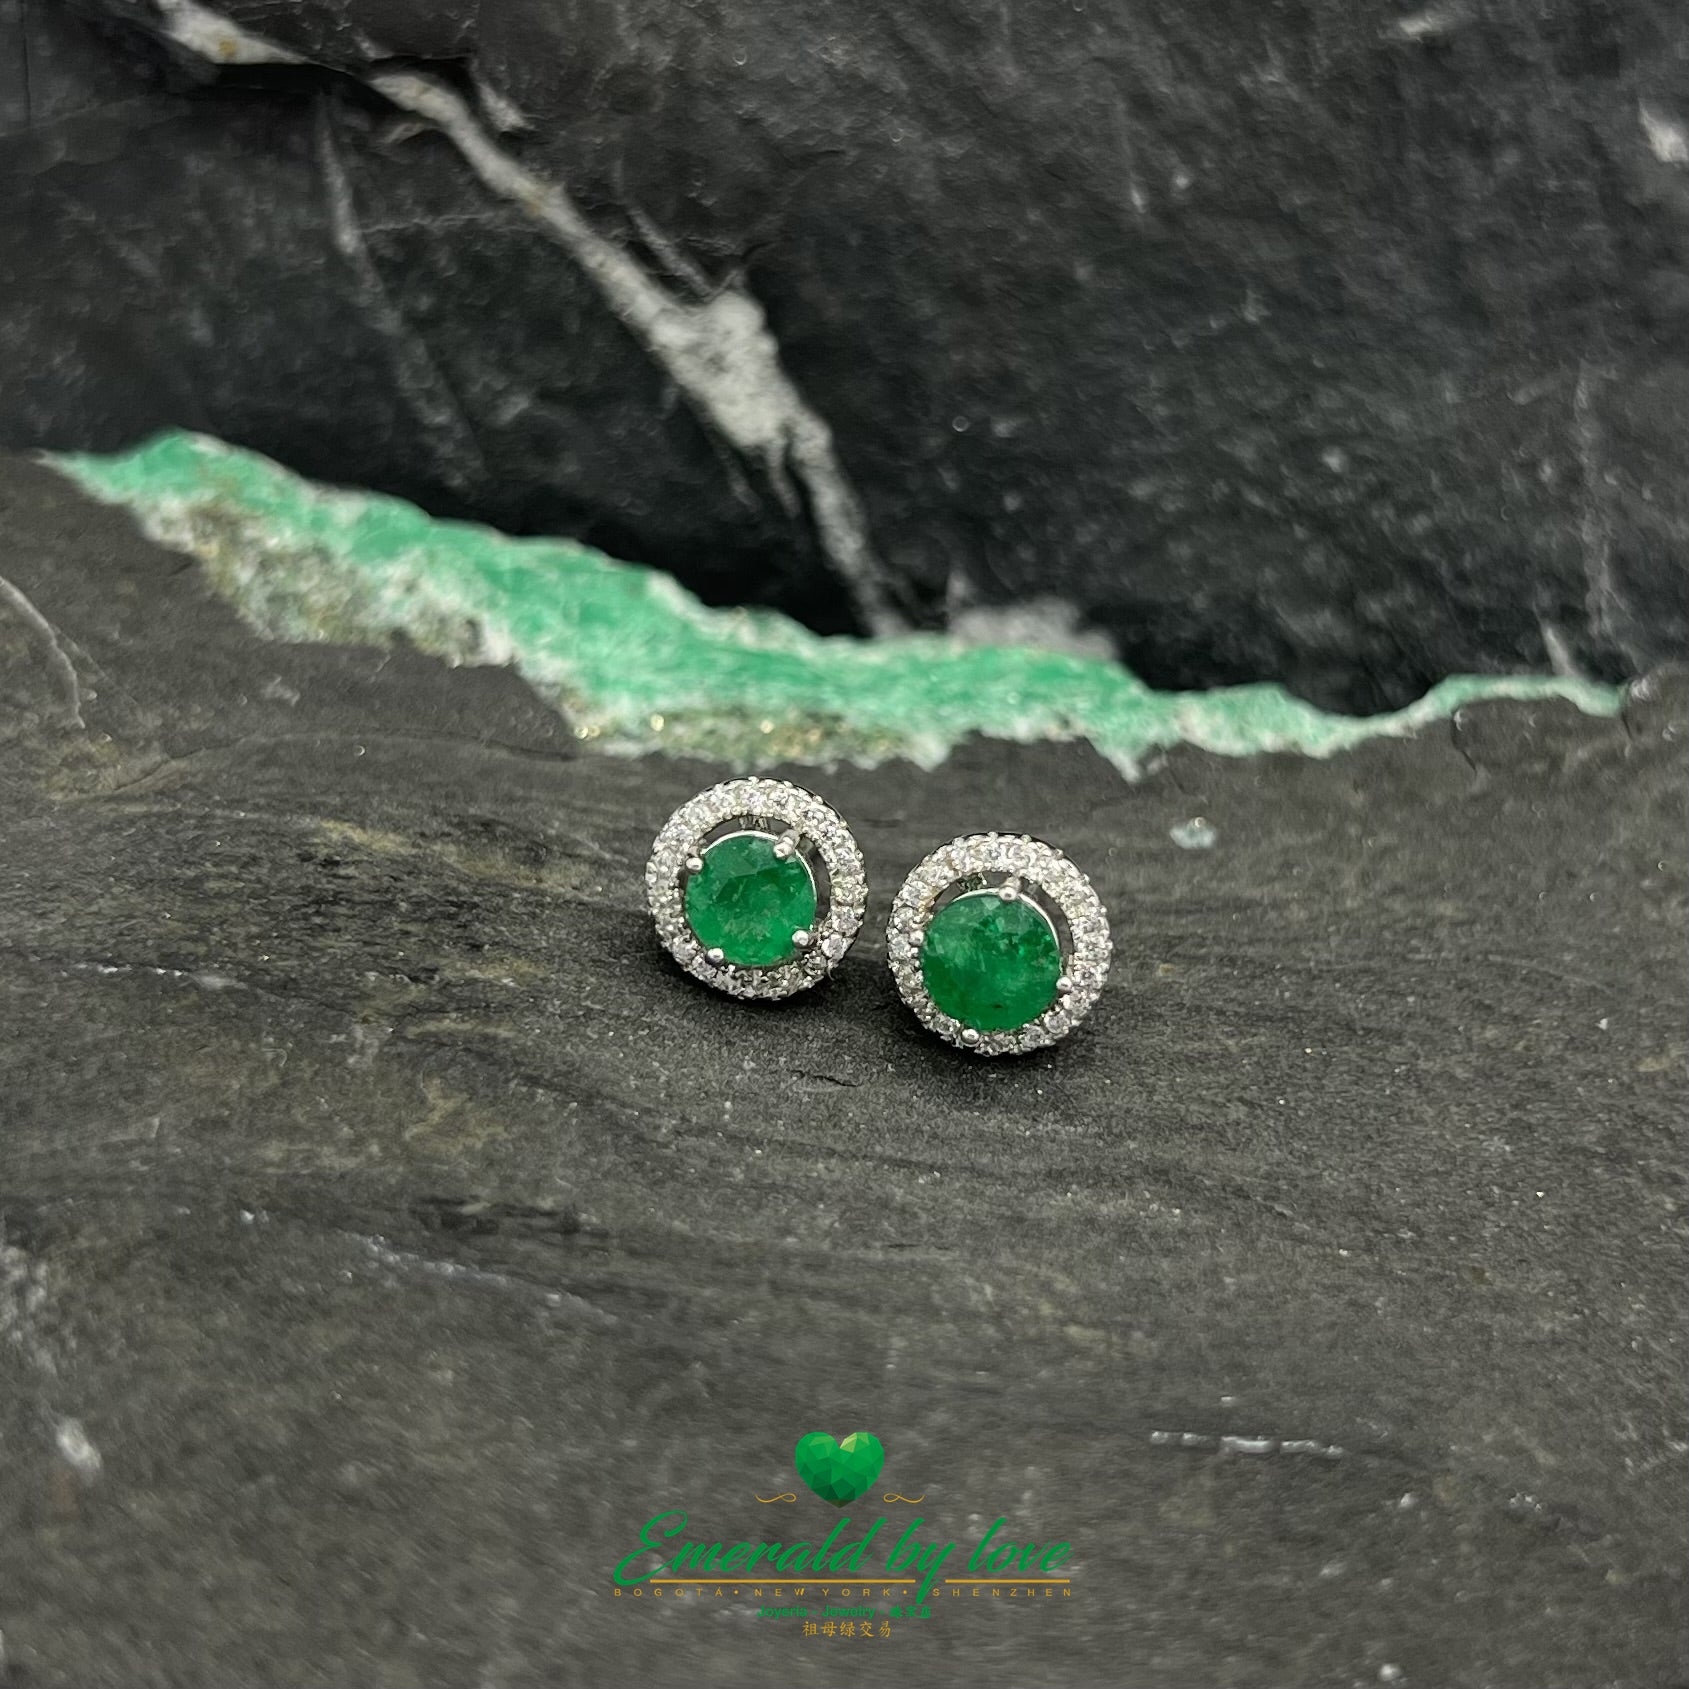 Round Sterling Silver Earrings with Central Emerald Surrounded by Zirconia